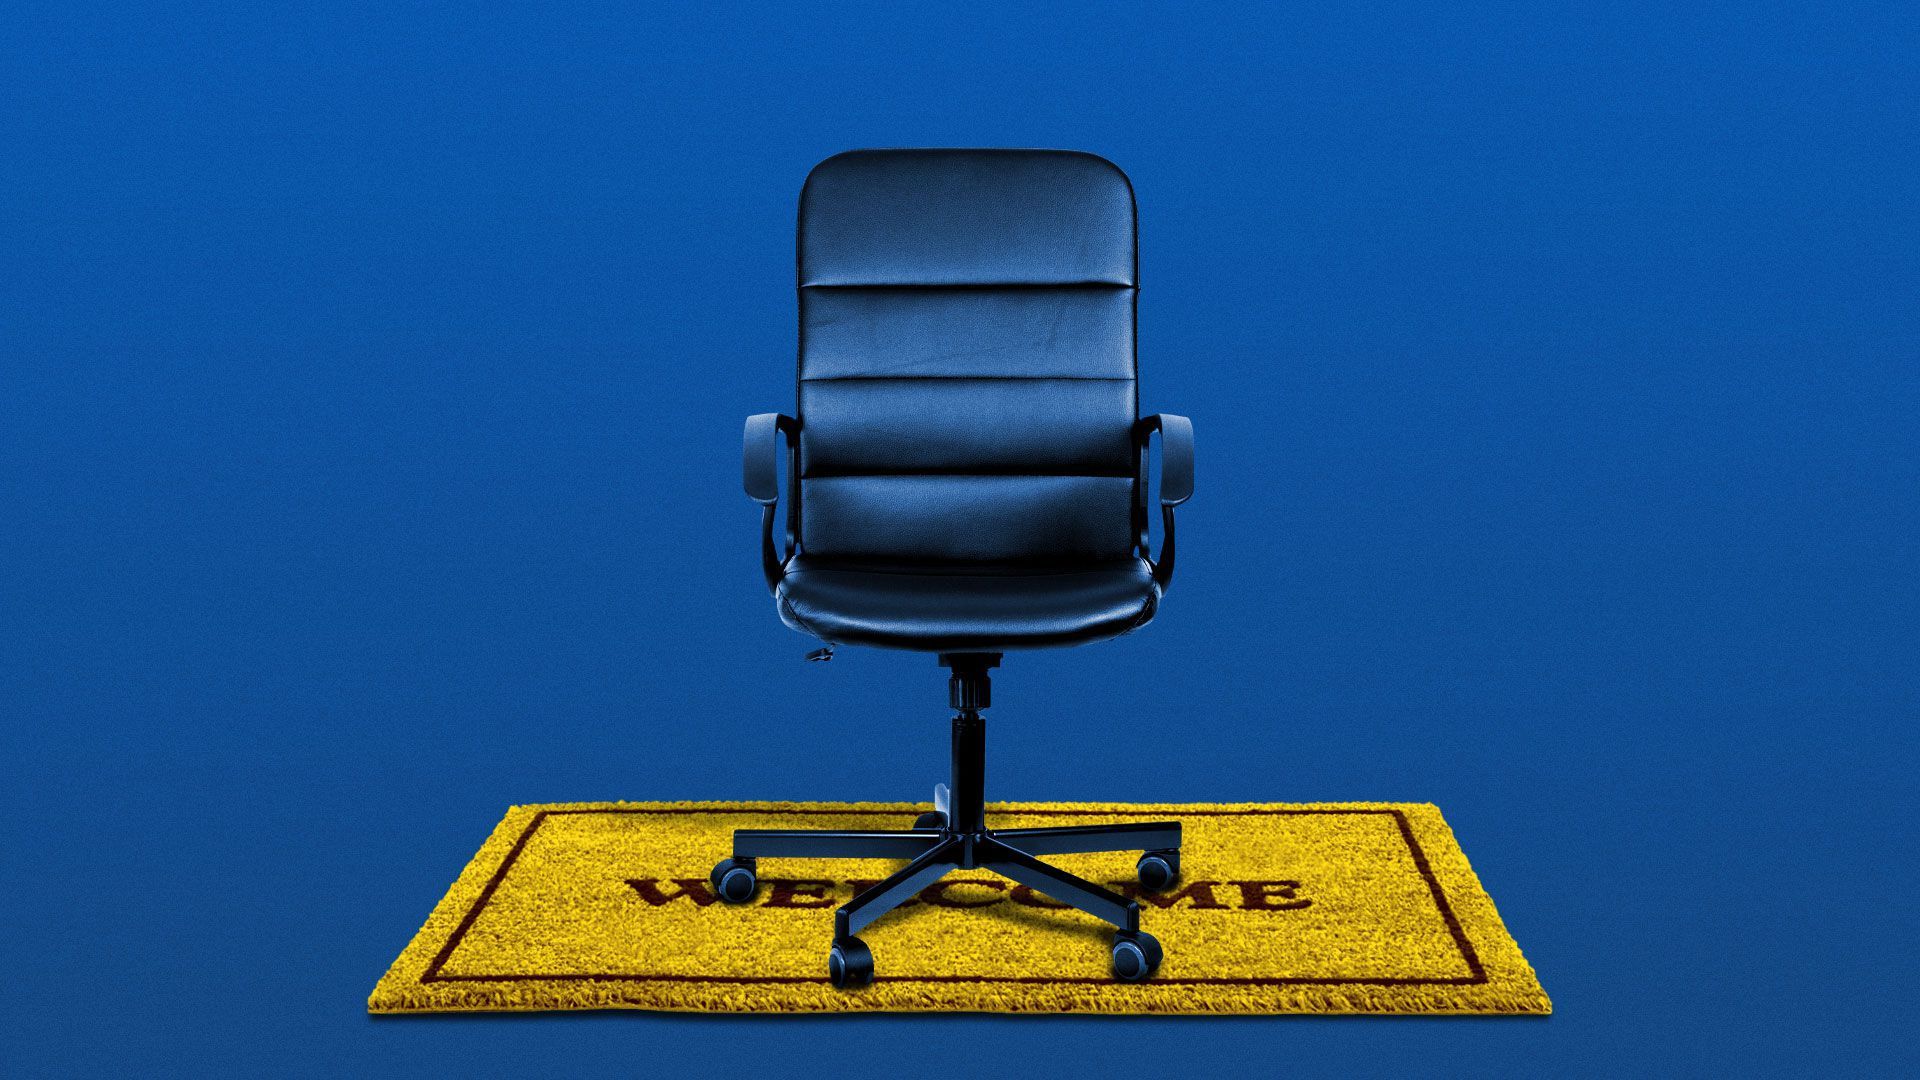 Illustration of an office chair.